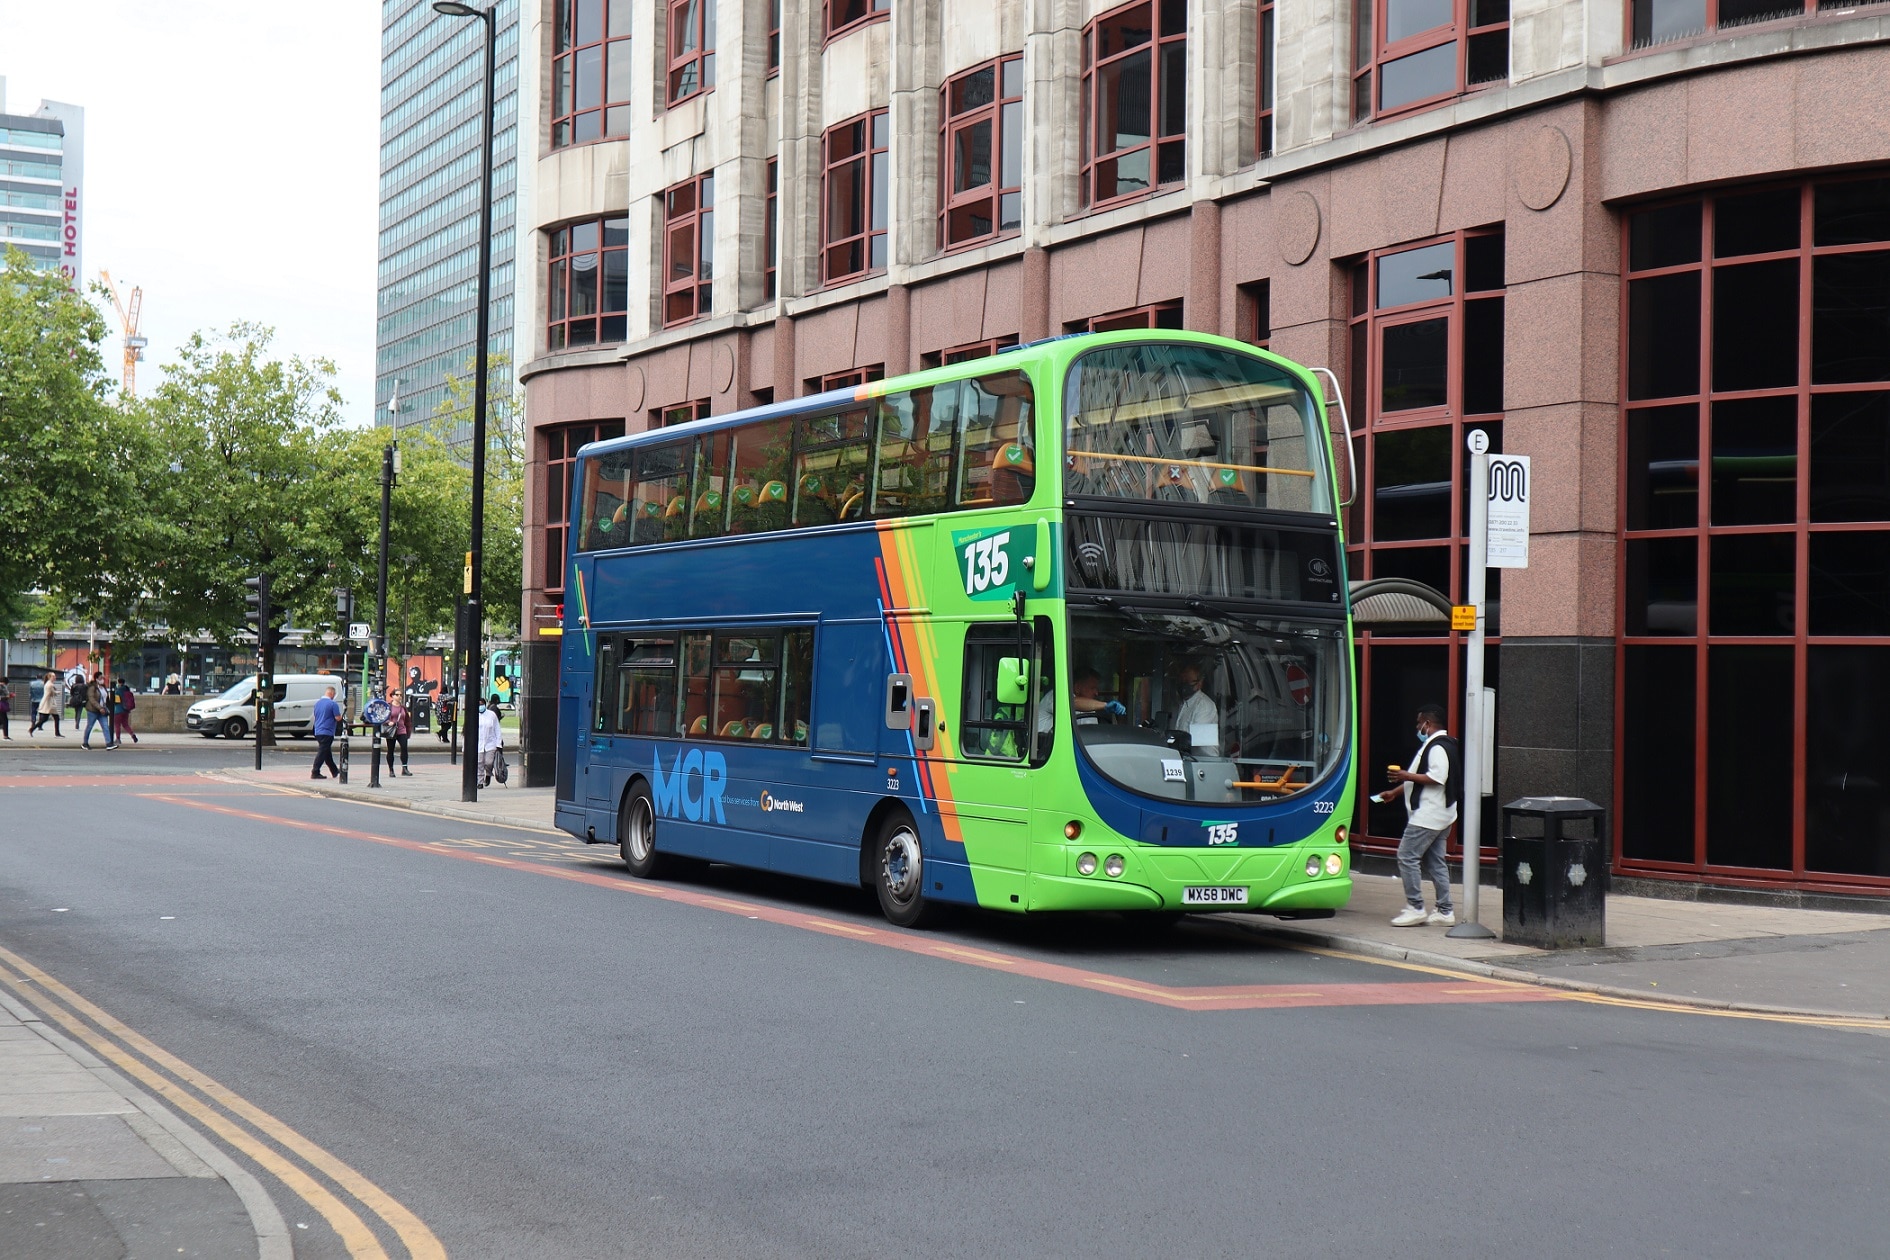 Interest in Greater Manchester franchised bus network extremely strong